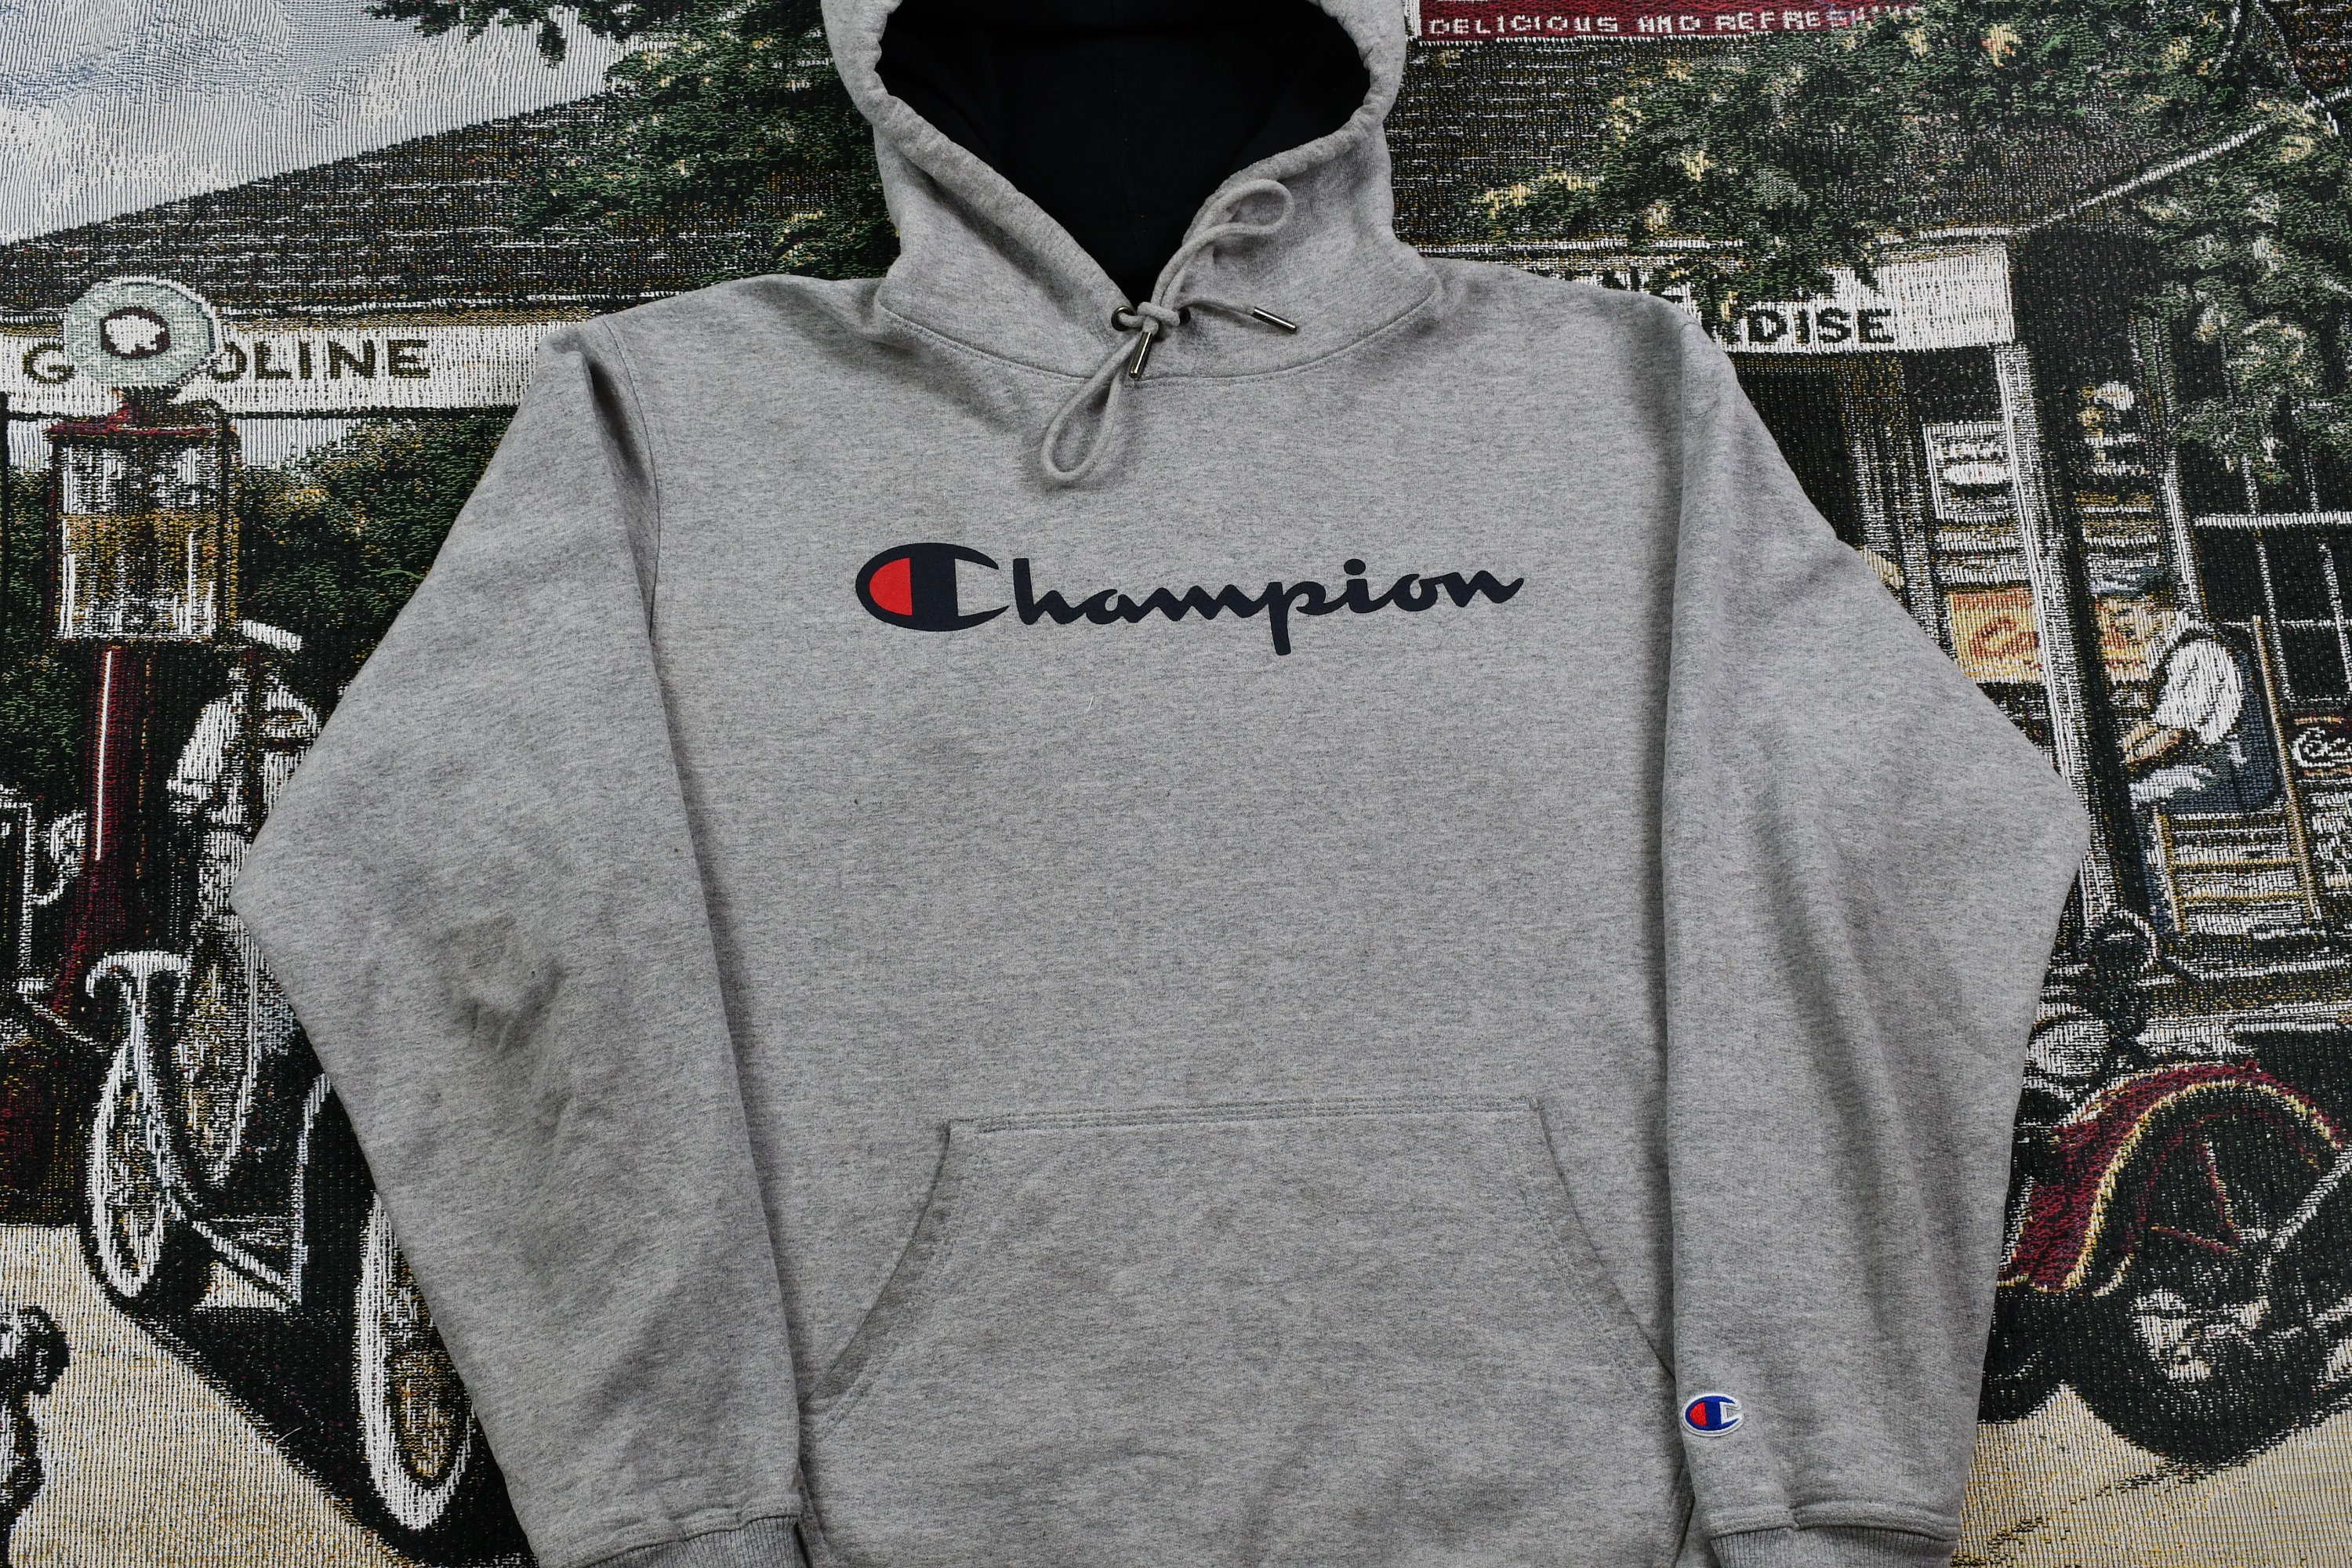 VintageVintage 2000 90s Champion Hoodie / Brand Logo Spell Out | Etsy